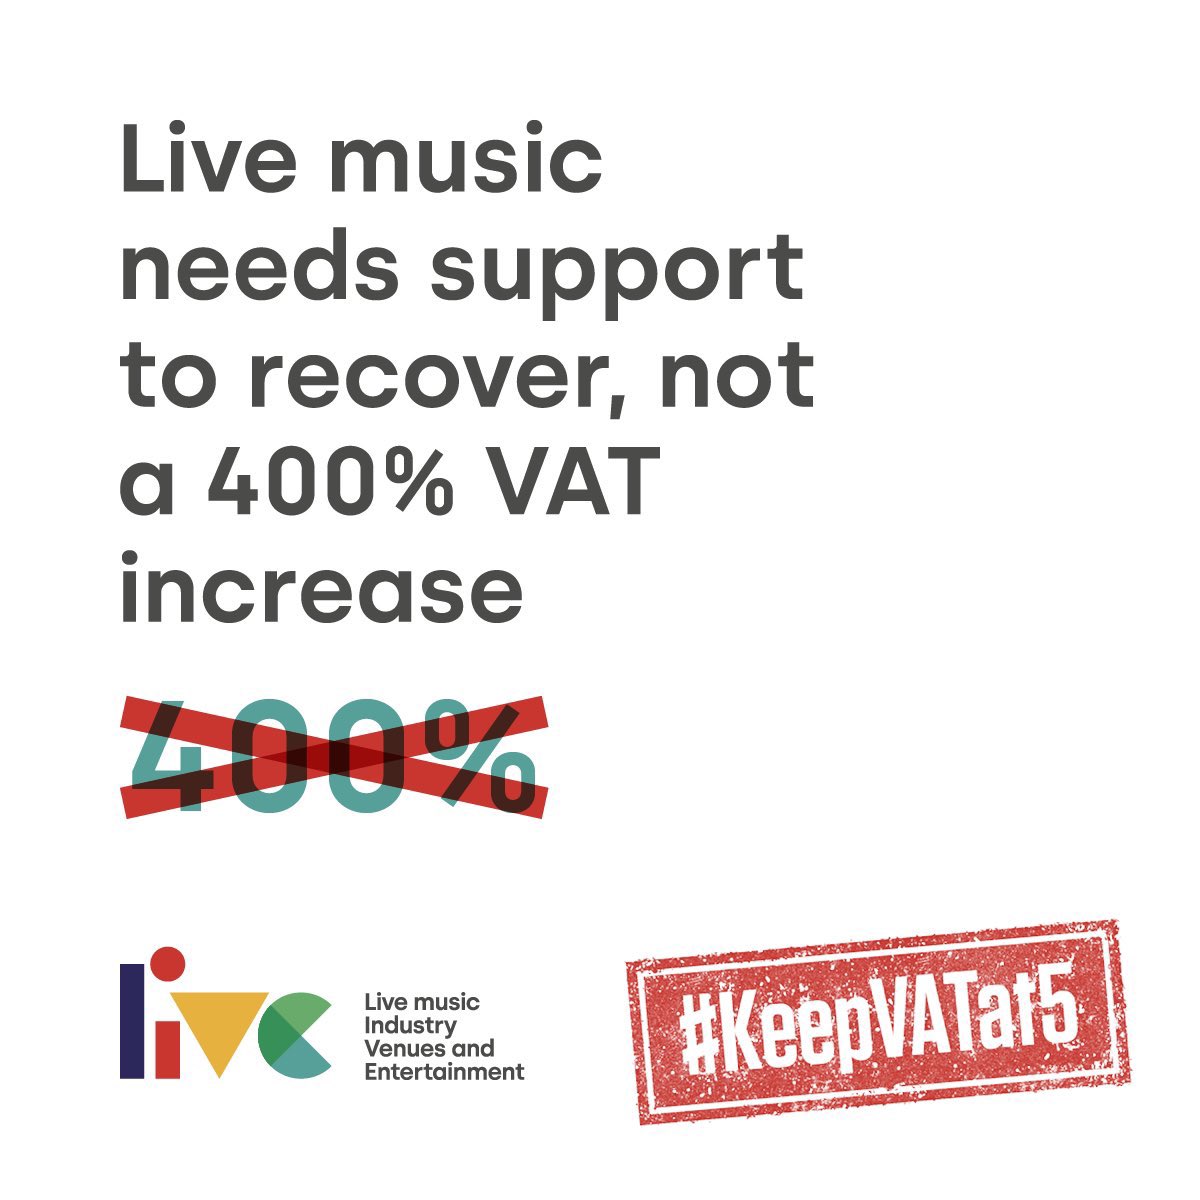 No gigs here since March 2020. The Government temporarily cut VAT on tickets to 5%. There has been no perceivable benefit so far & it's due to end 31/3/21.

It needs to stay at 5% so live music can recover, which was the initial intention. Live music needs the support #KeepVATat5